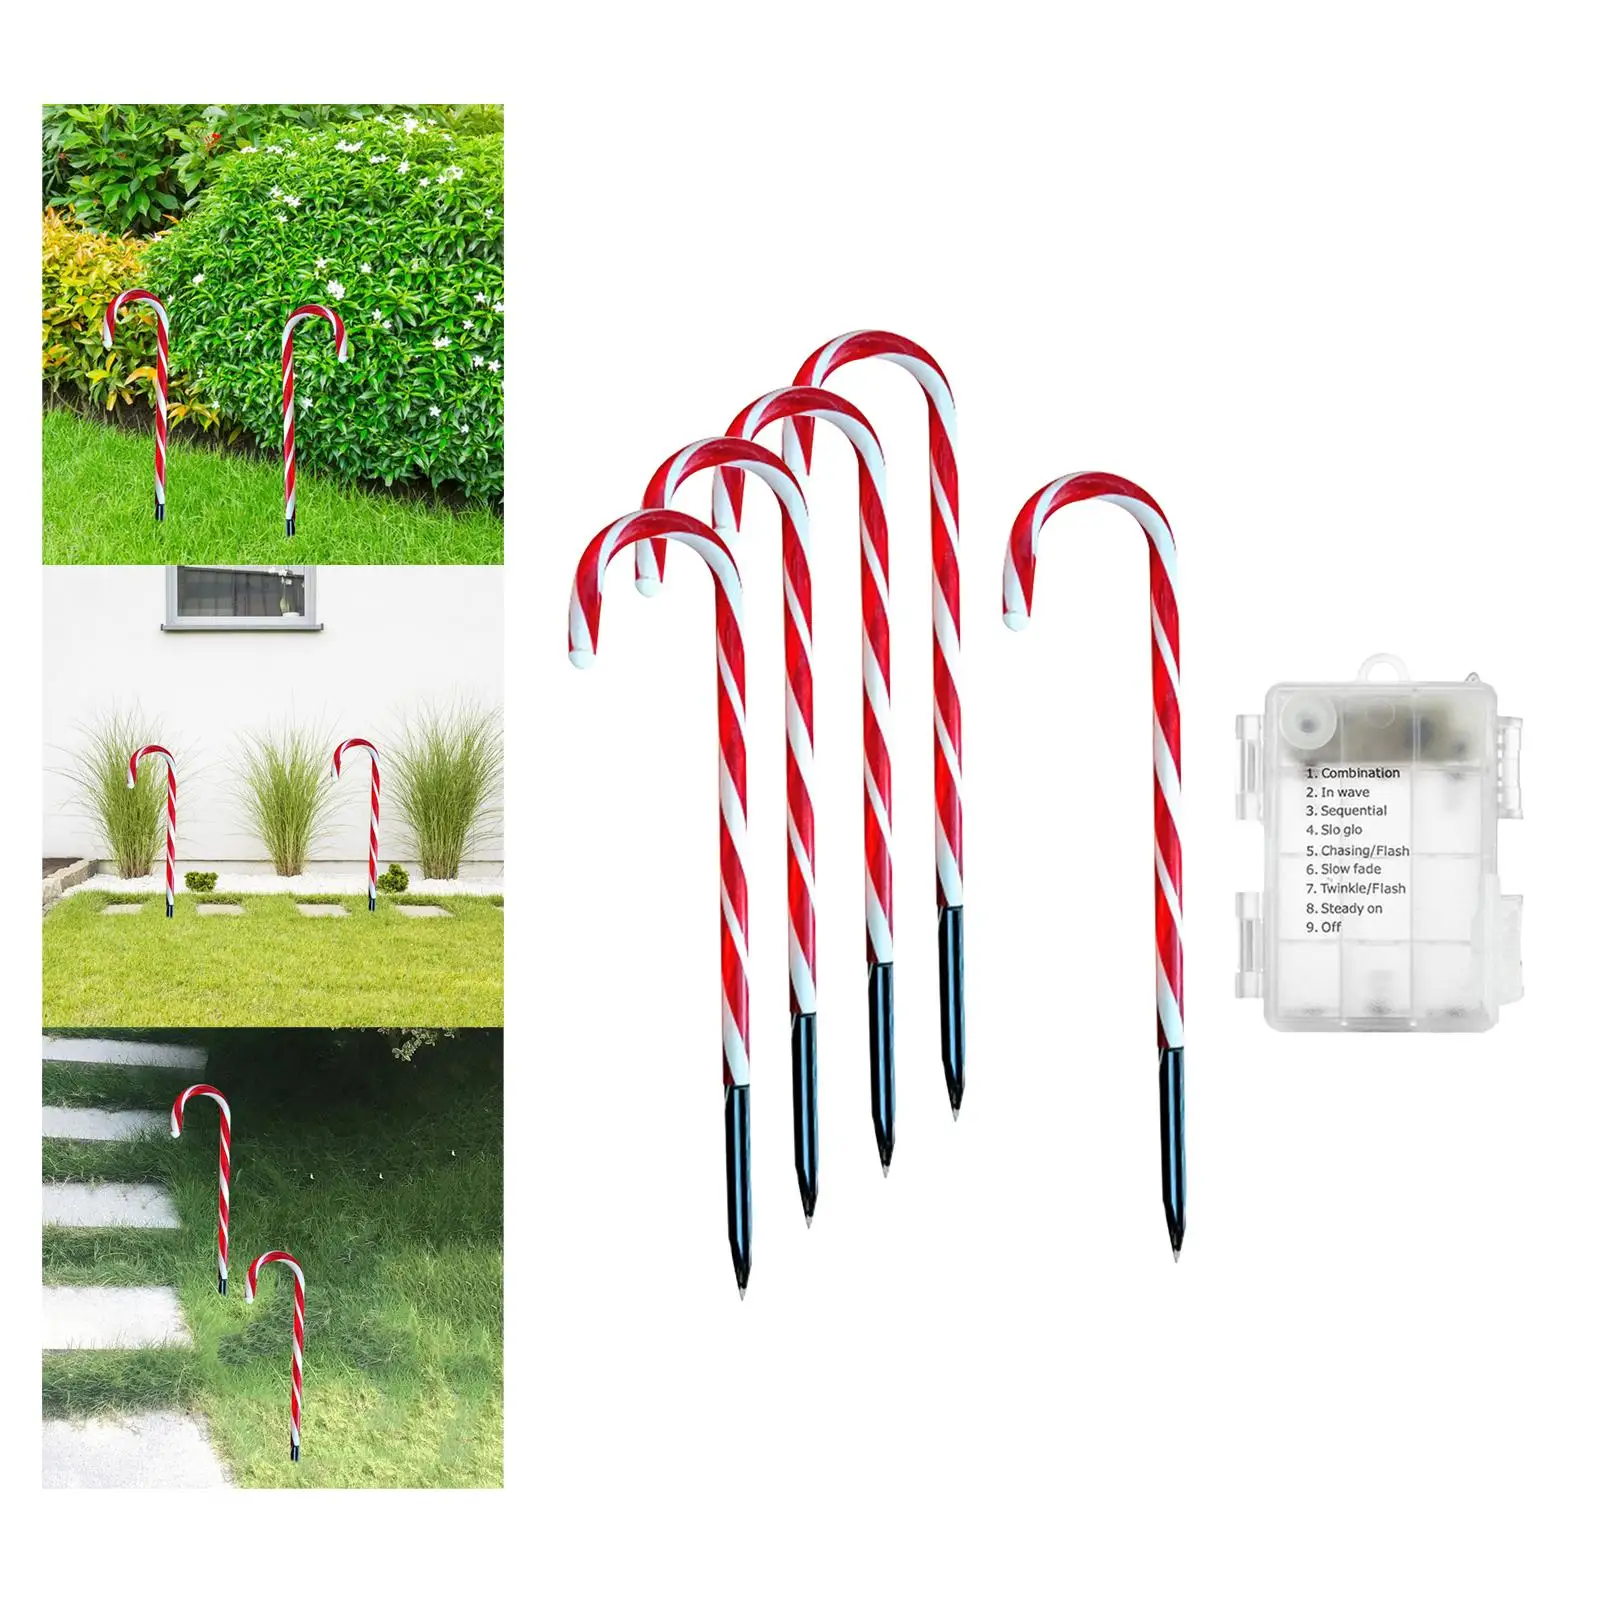 Christmas LED Lamps Ornaments Pathway String Candy Cane Battery Operated Lights for Holiday Backyard Lawn Garden